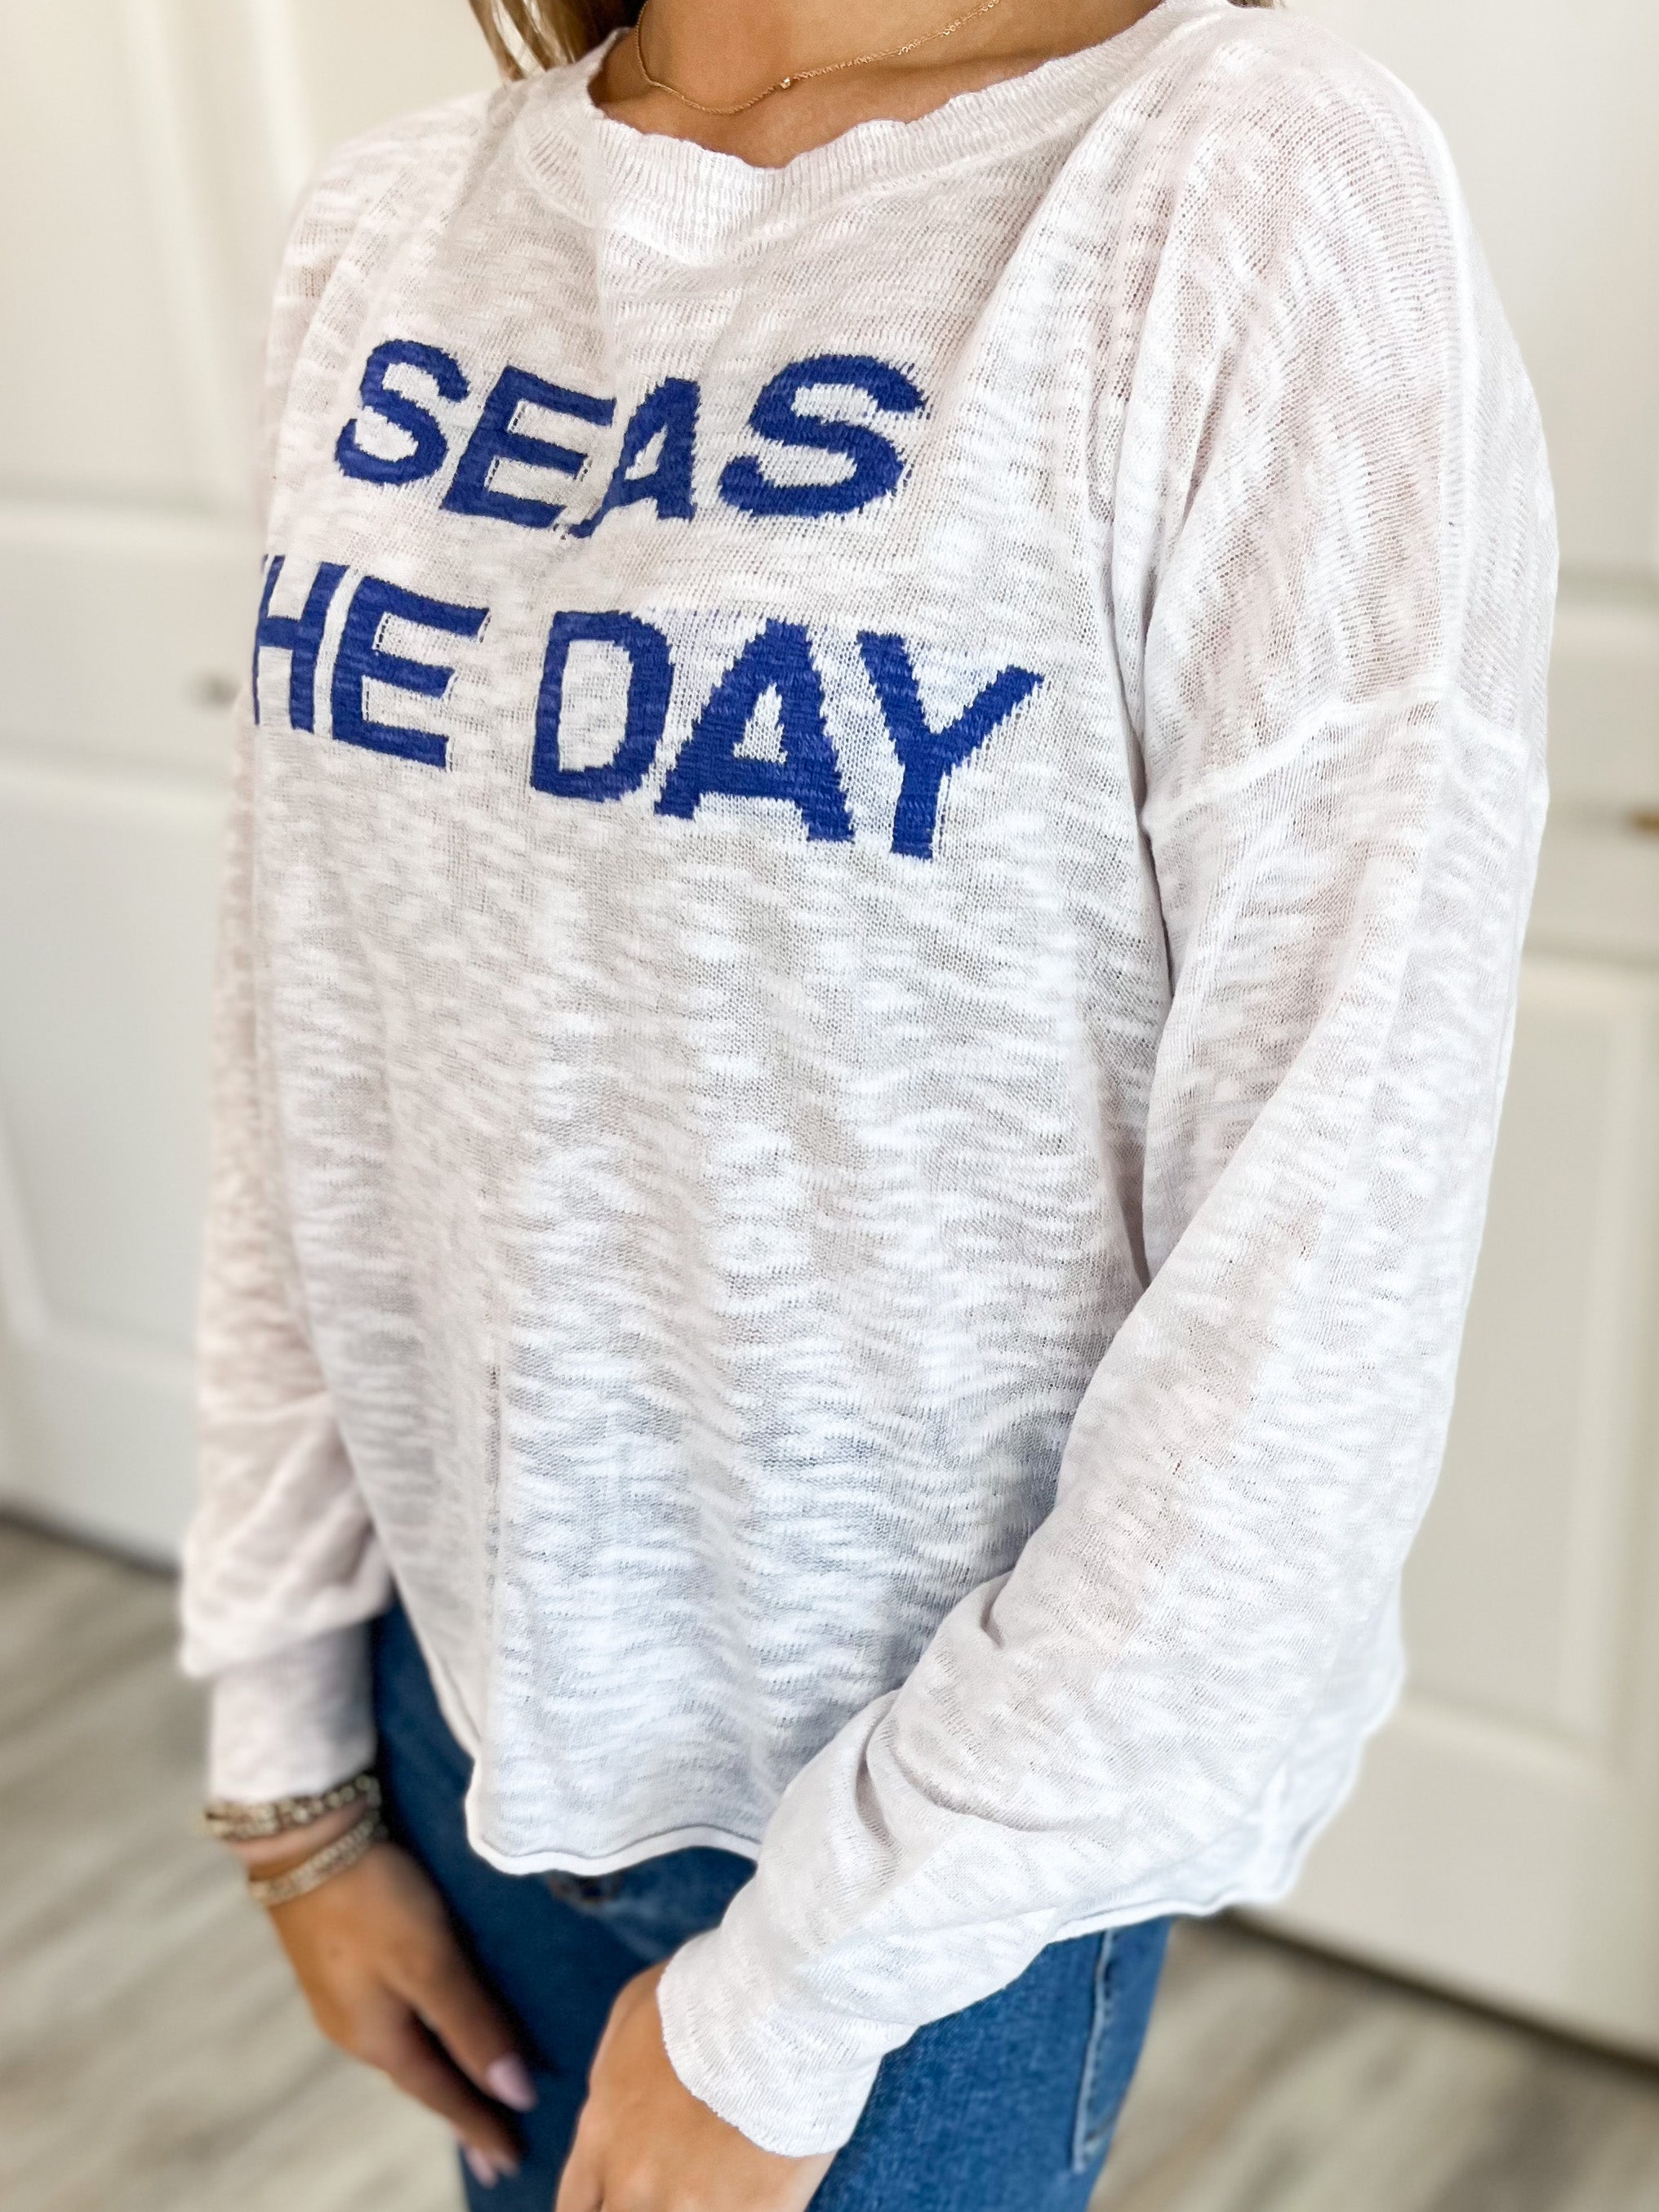 Seas The Day Sweater